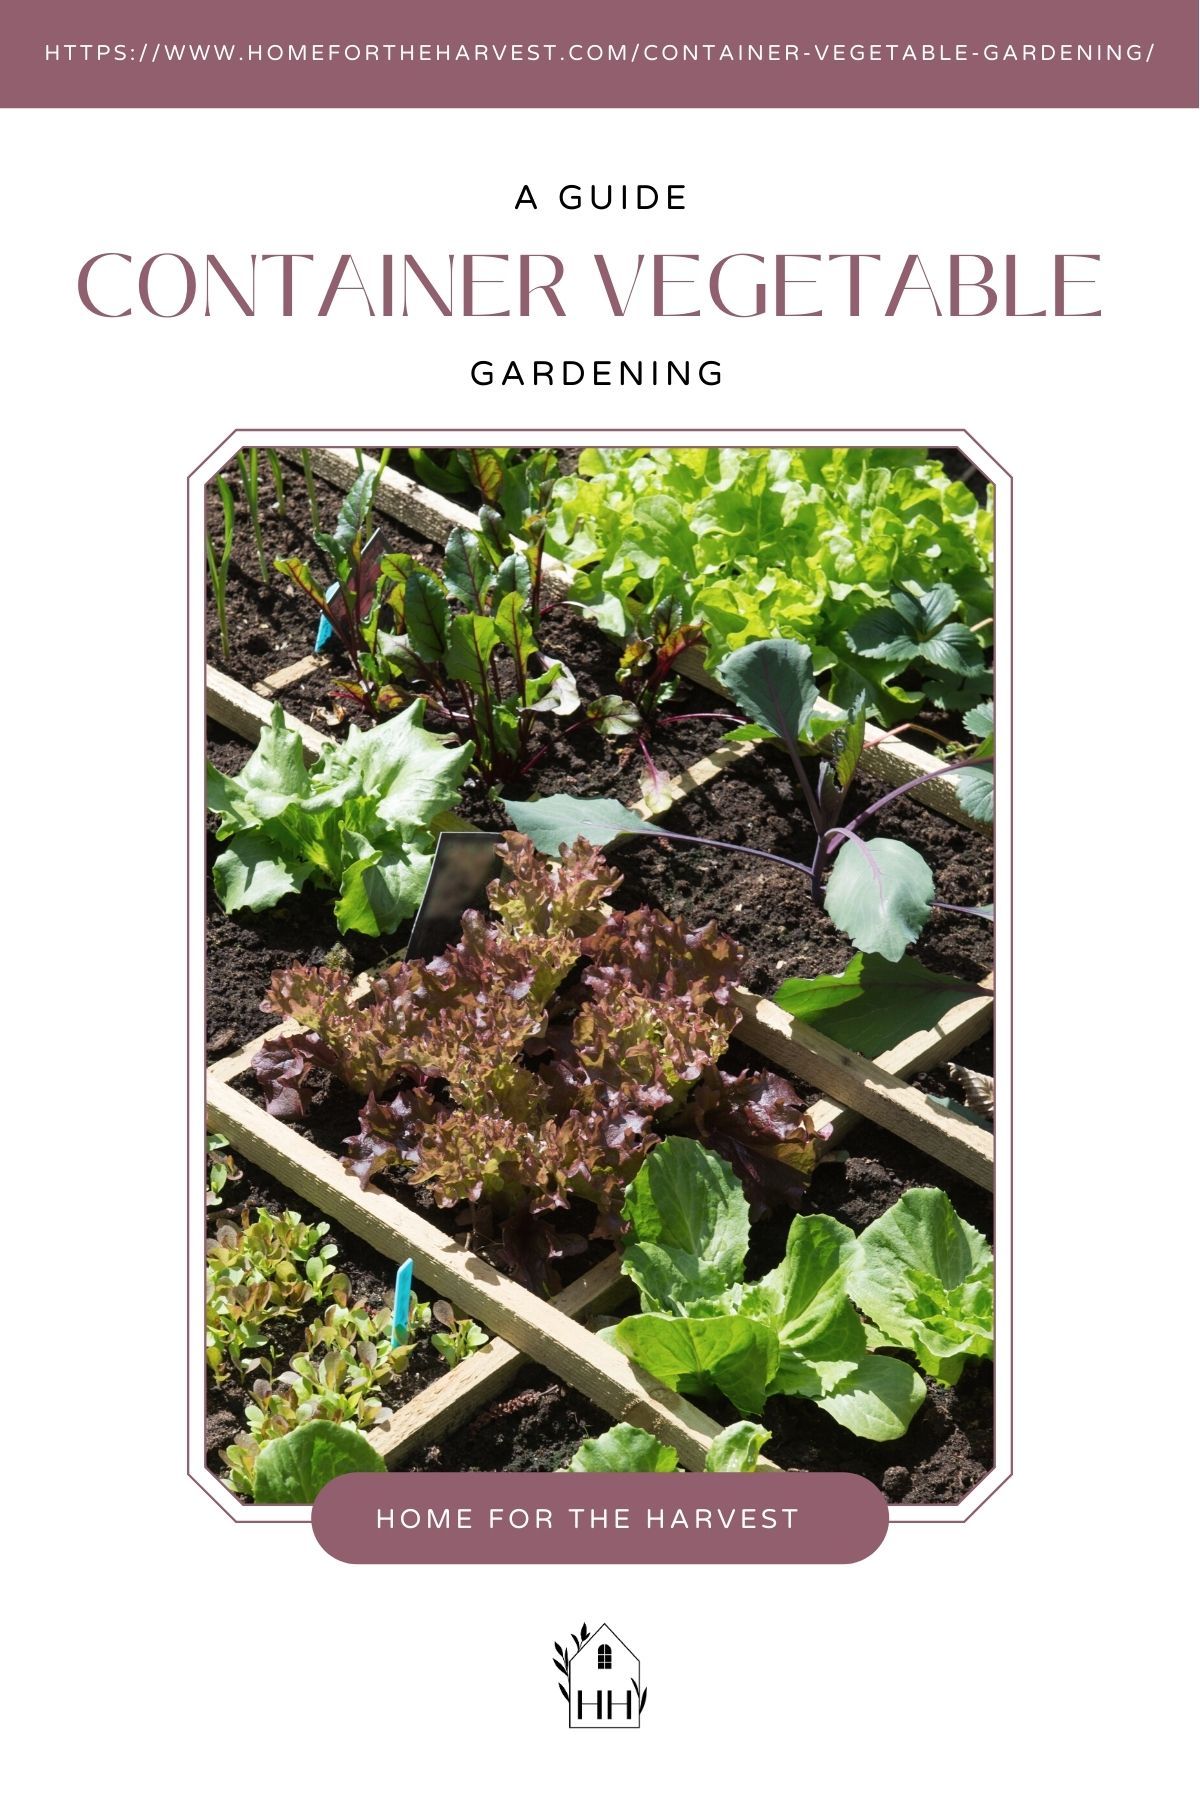 Container vegetable gardening a complete guide - pinterest via @home4theharvest